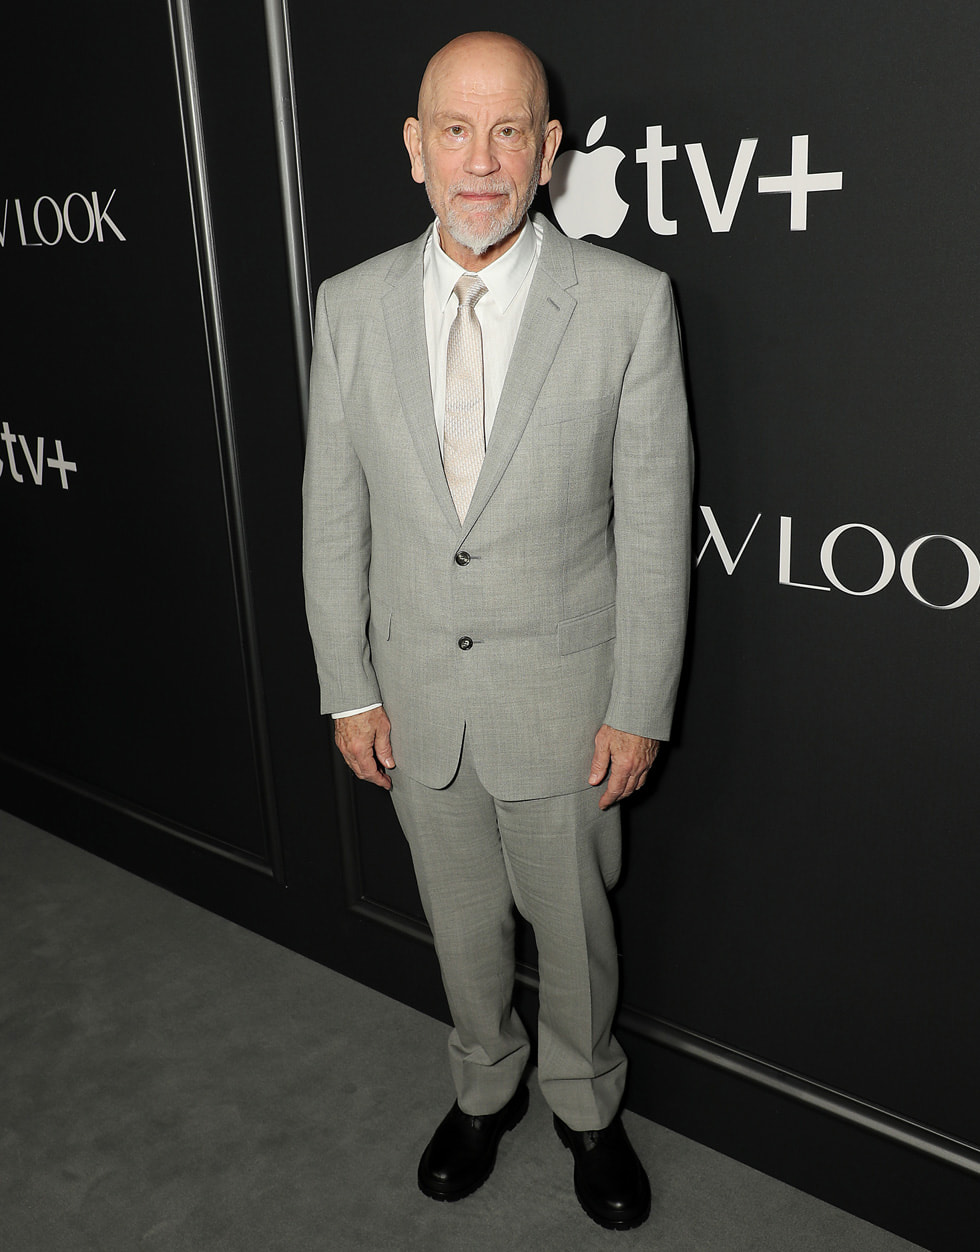 John Malkovich attends the premiere of the Apple TV+ thrilling series “The New Look” at Florence Gould Hall. “The New Look” will make its global debut on Apple TV+ on Wednesday, 14 February 2024.